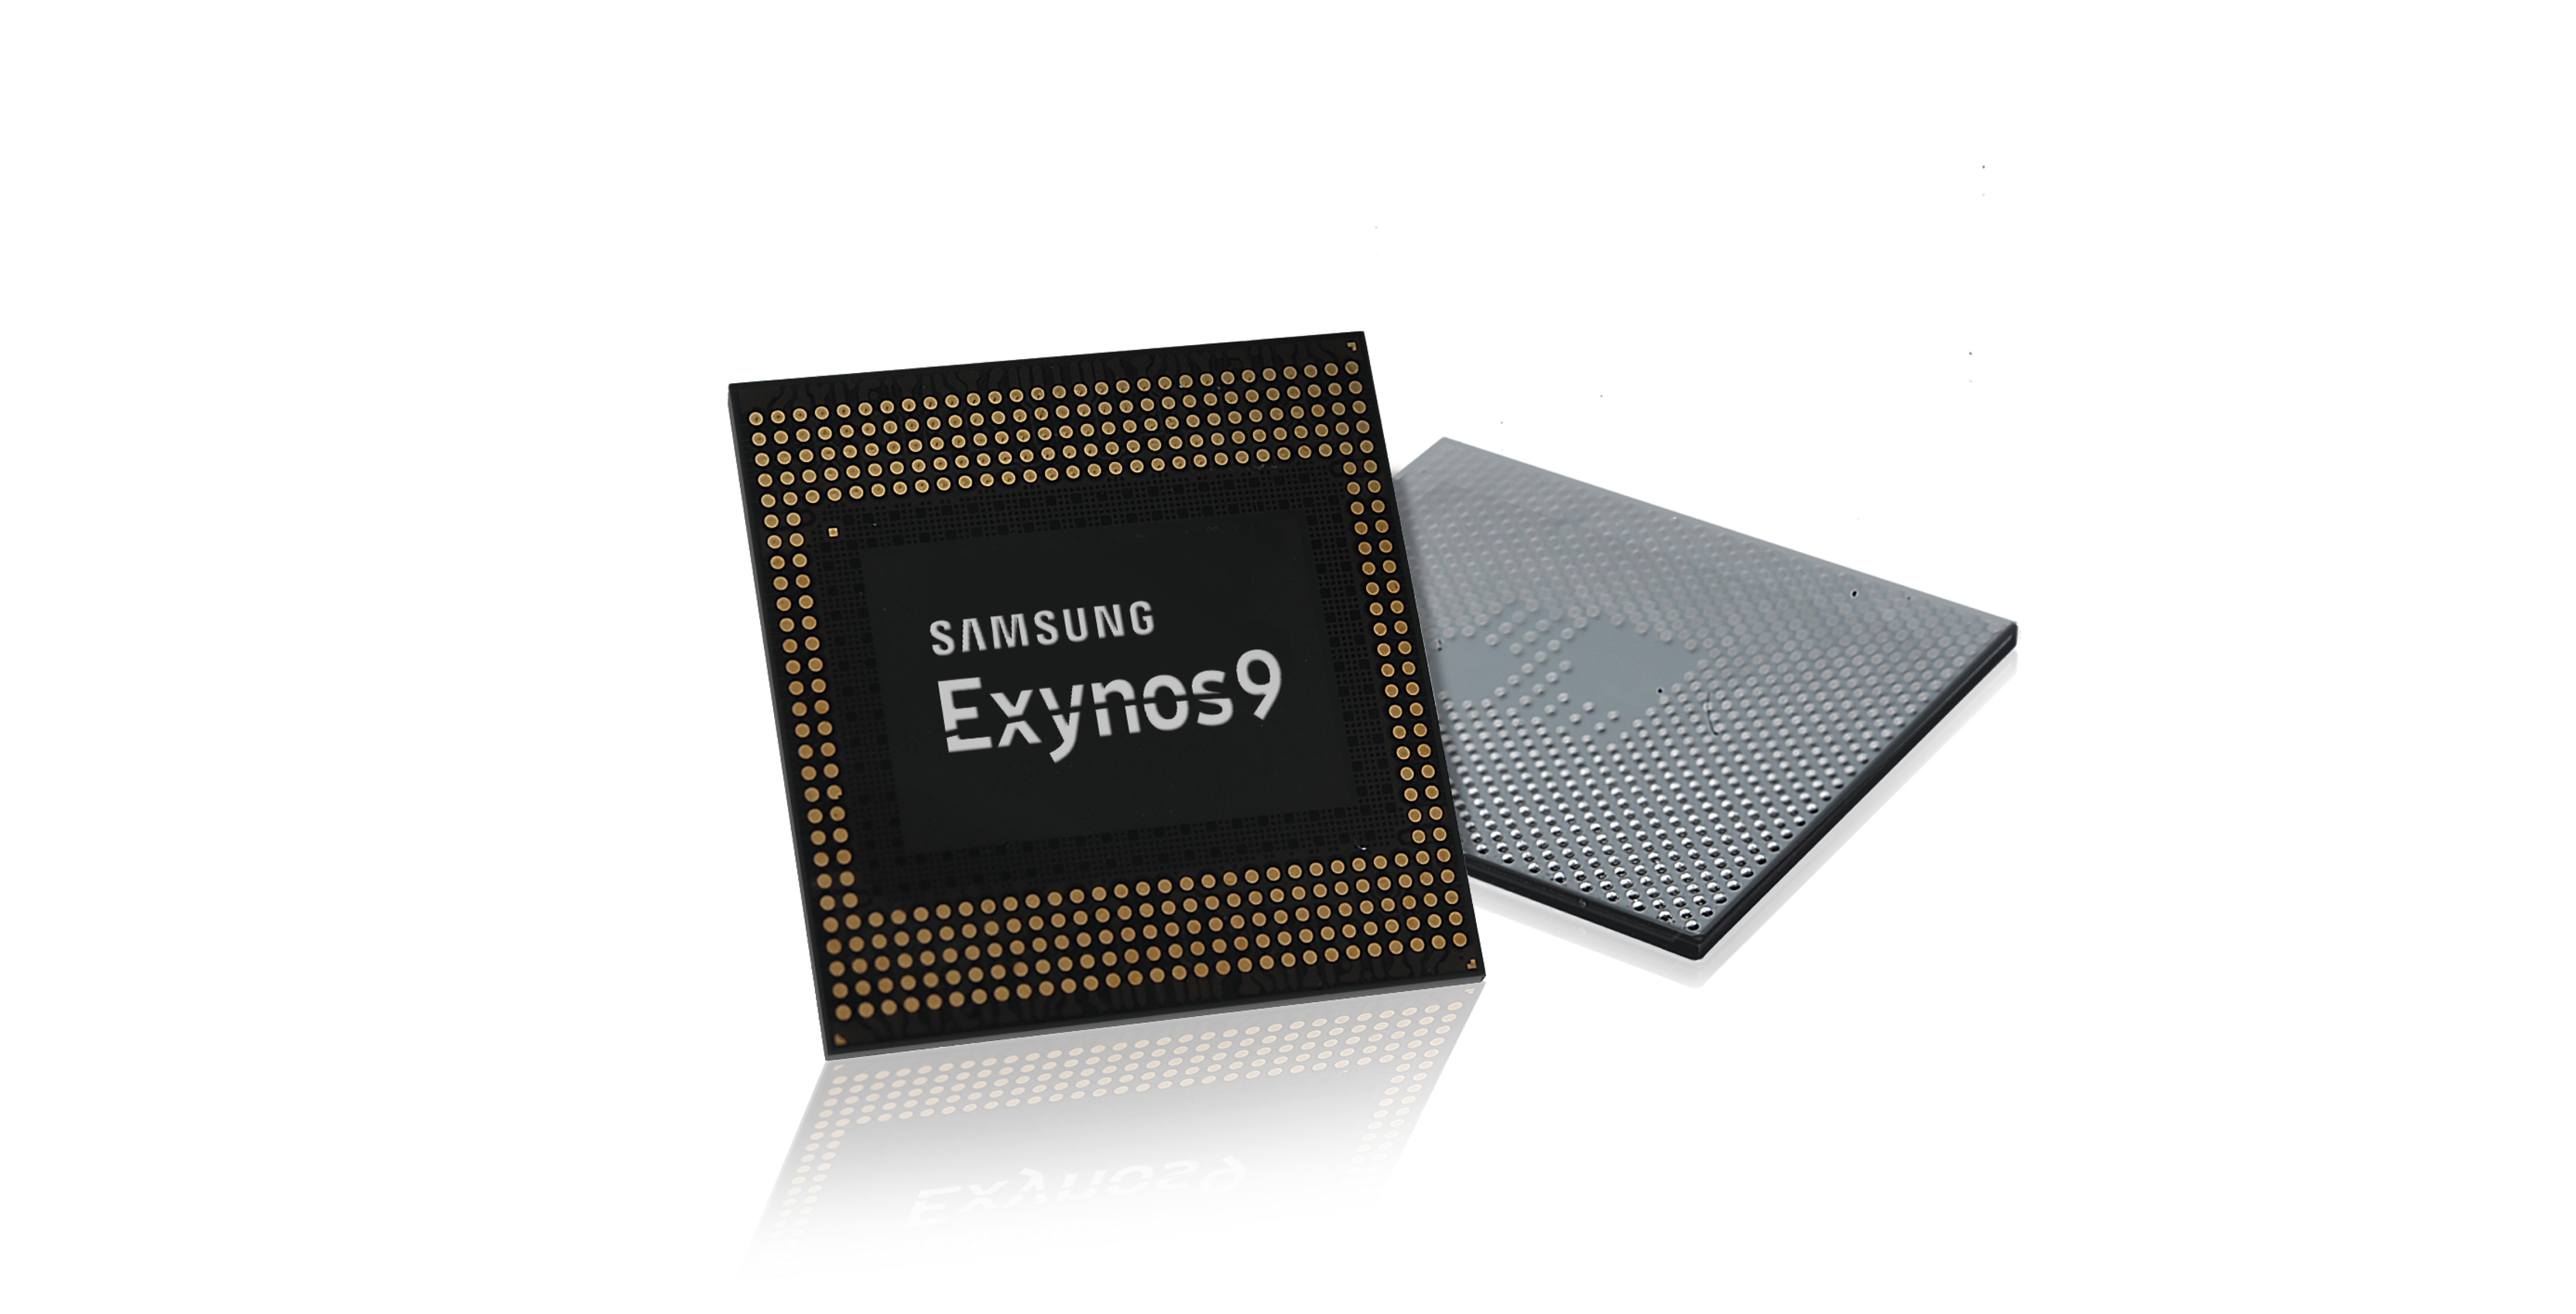 Exynos 9 Series 8895 system-on-a-chip - new Exynos 9 chip supports 4K VR